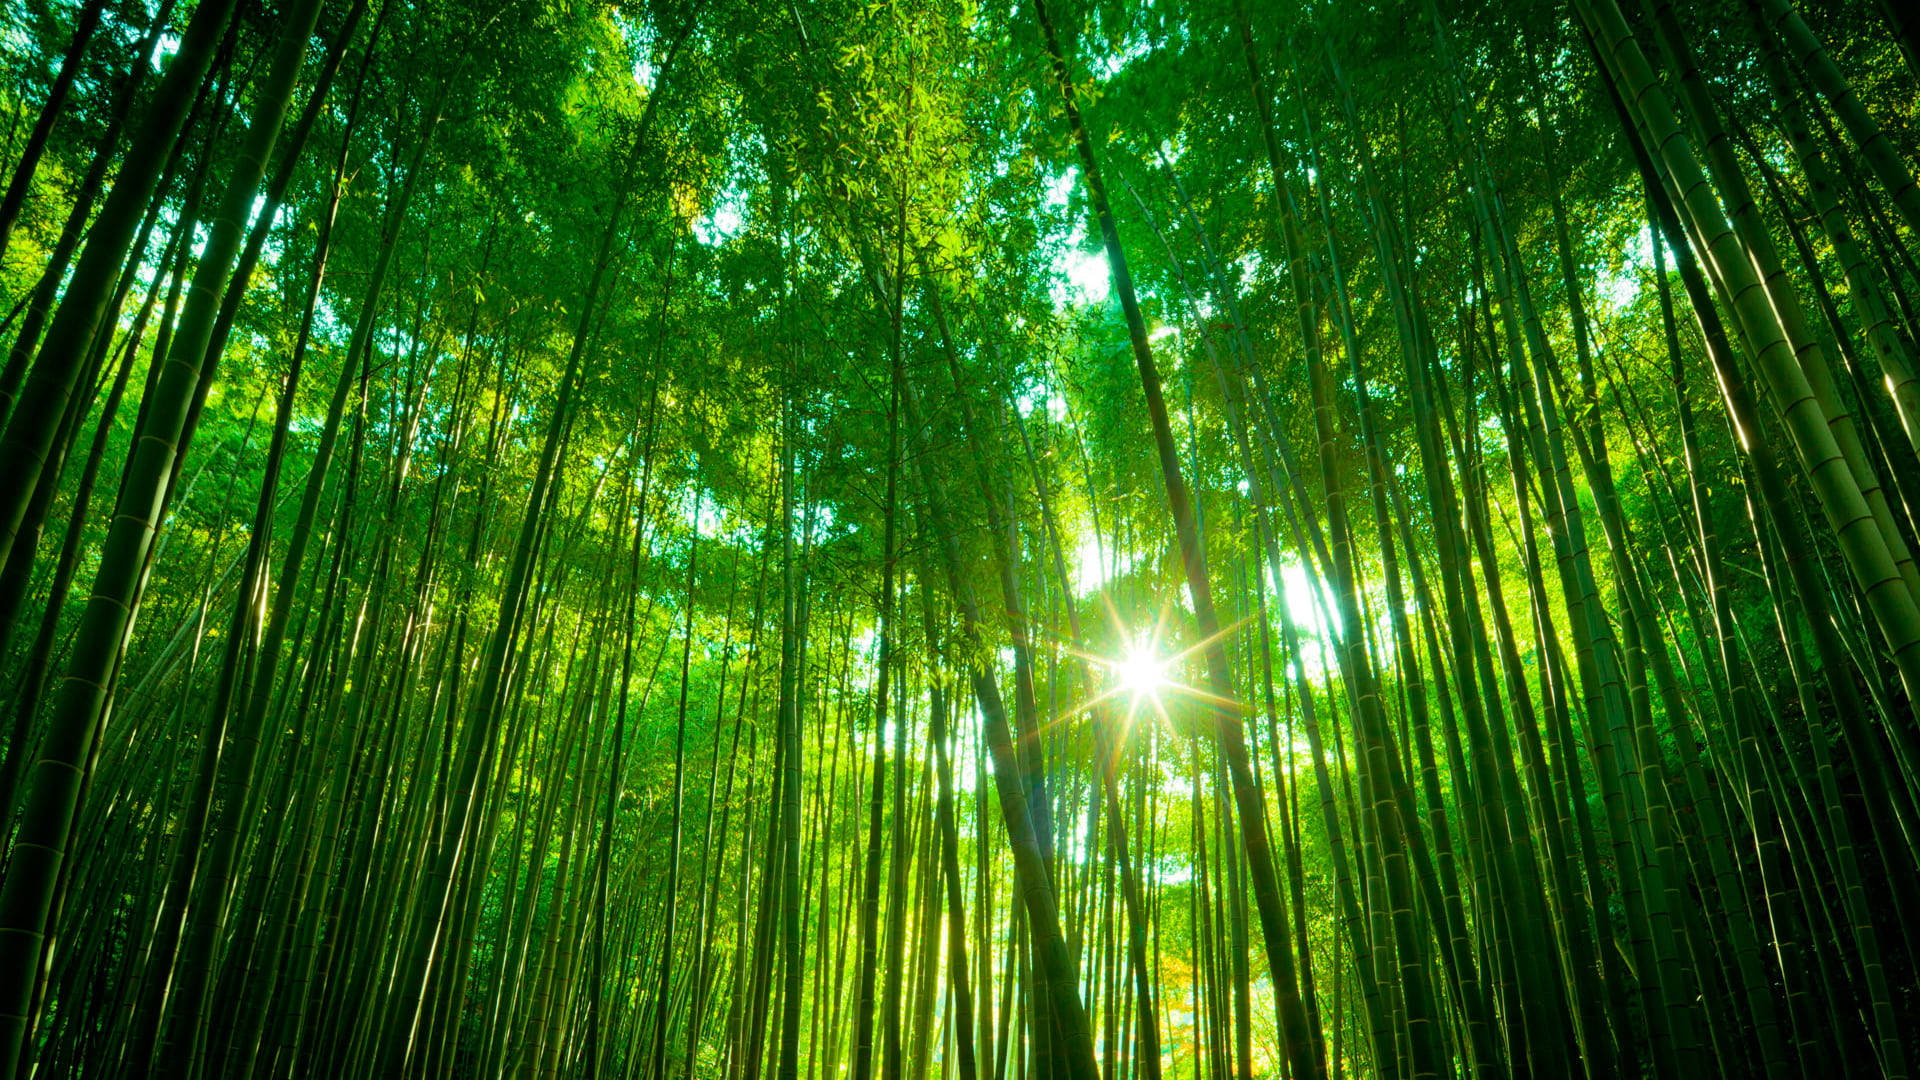 Caption: Serene Bamboo Forest Iphone Wallpaper